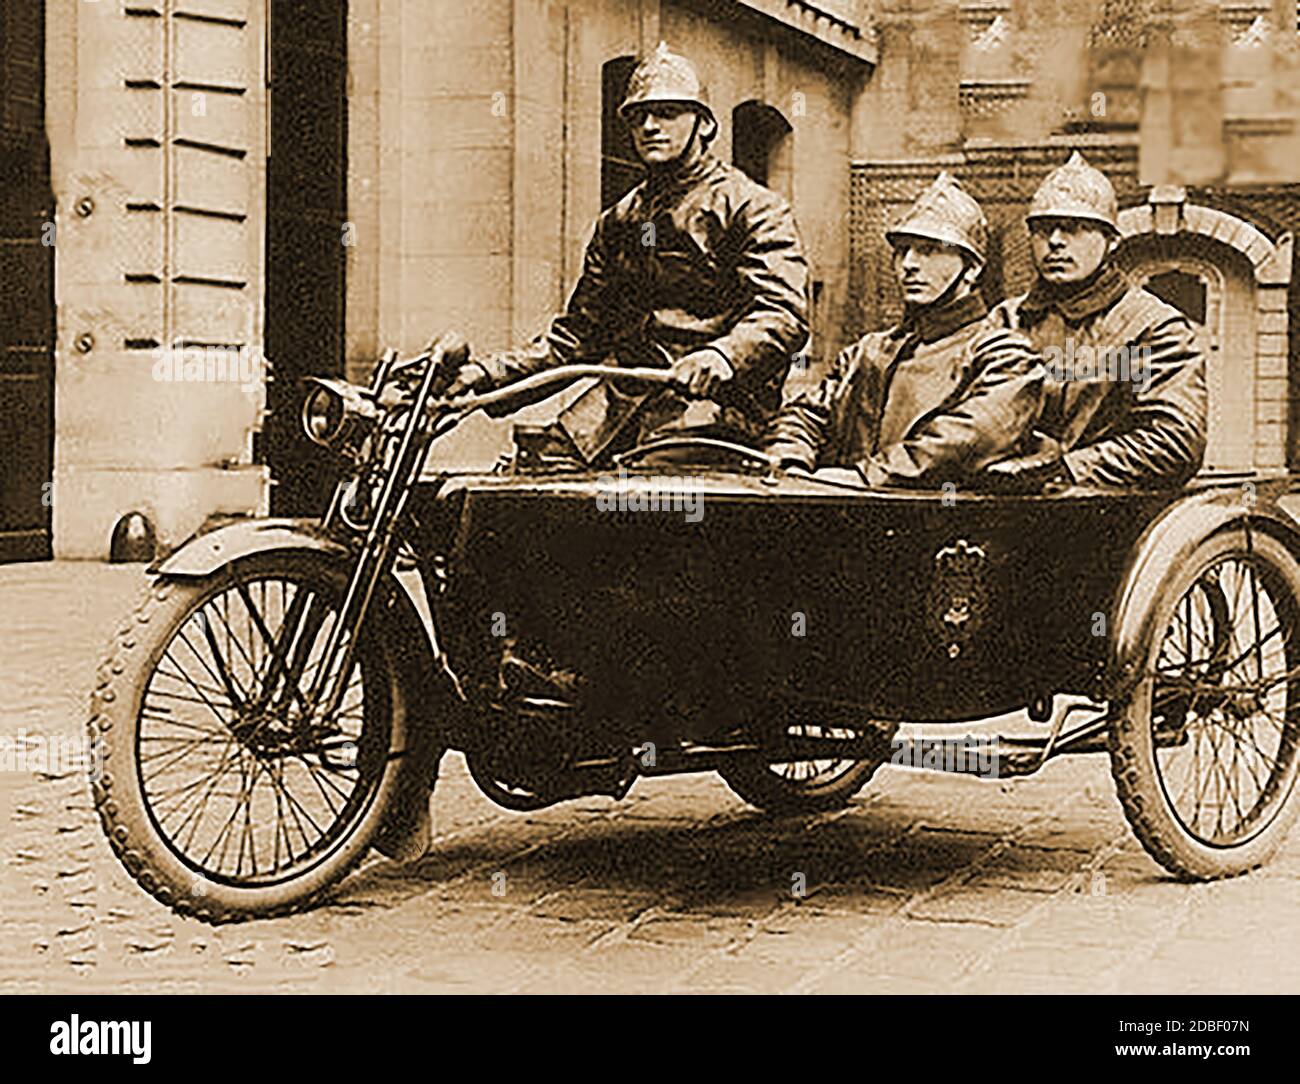 An ear;y French photograph of a Paris firecrew motorcycle andf sidecar with three firemen Stock Photo